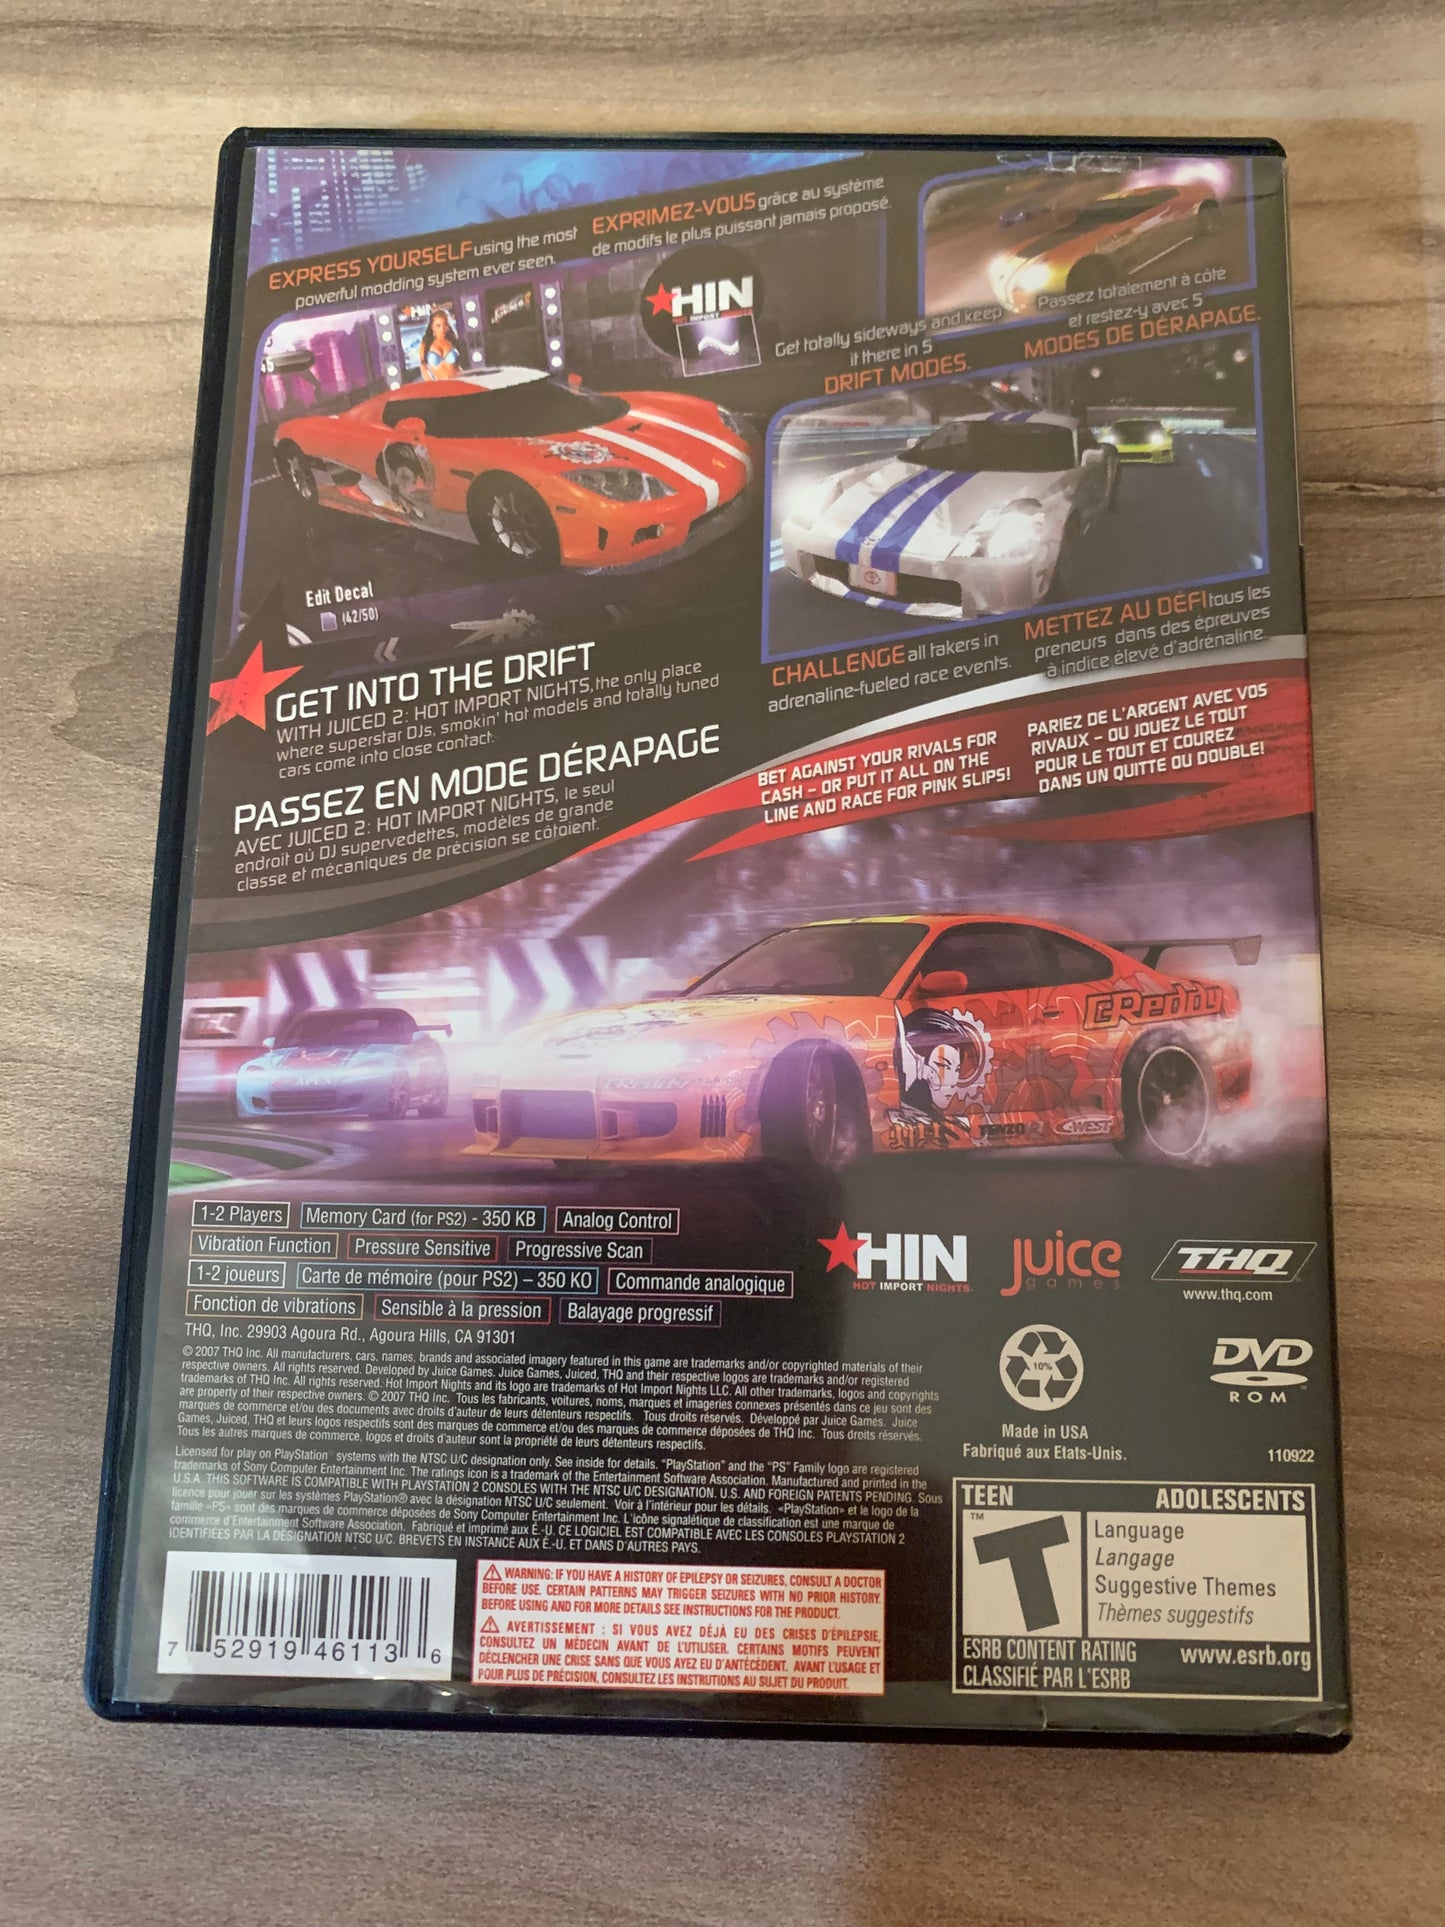 SONY PLAYSTATiON 2 [PS2] | JUiCED 2 HOT iMPORT NiGHTS